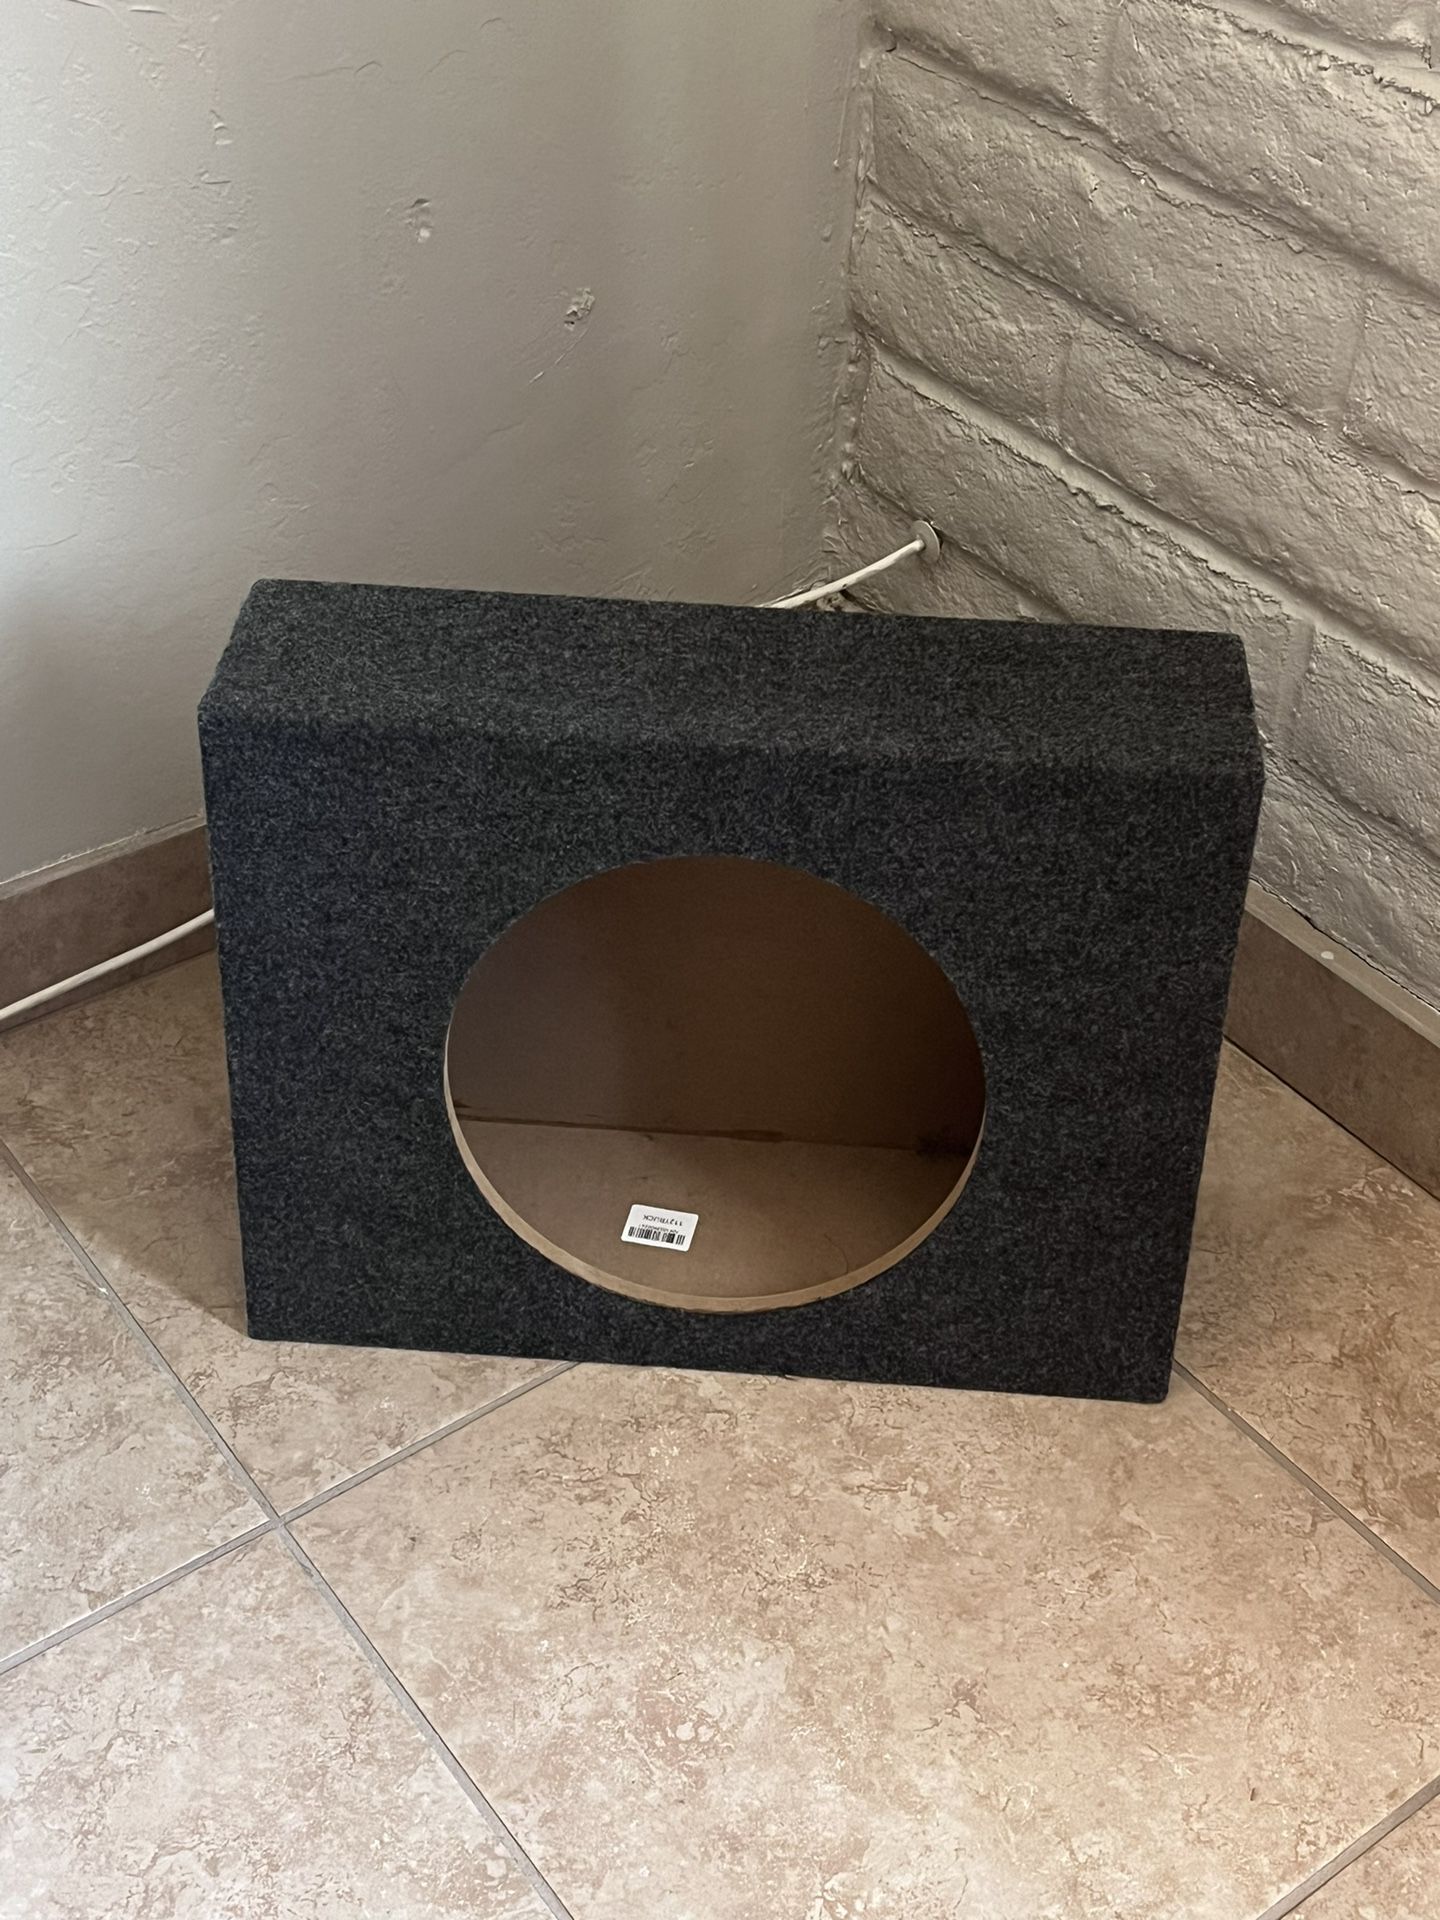 NEW American Sound Connection 12” Subwoofer Enclosure For Standard Cab Truck